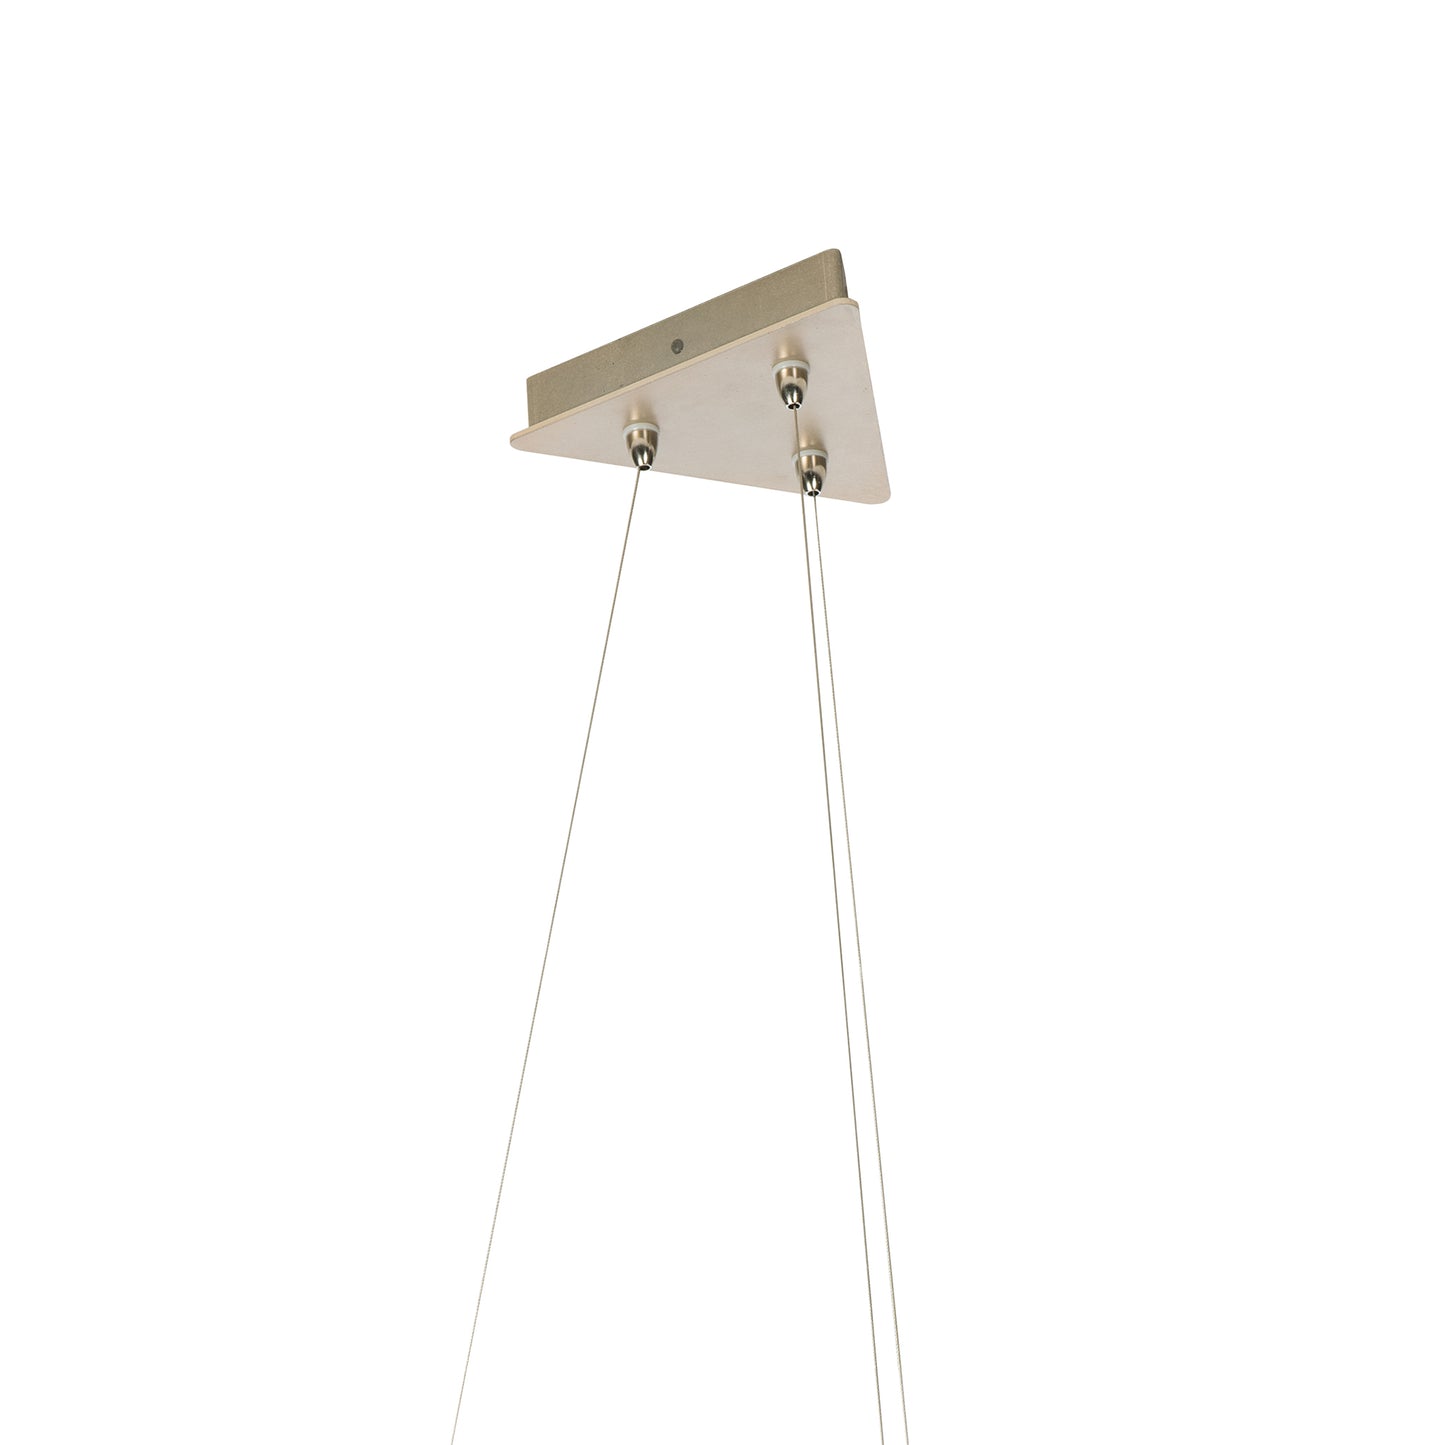 A handcrafted Flux Large Pendant by Hubbardton Forge, with two wires hanging from it.